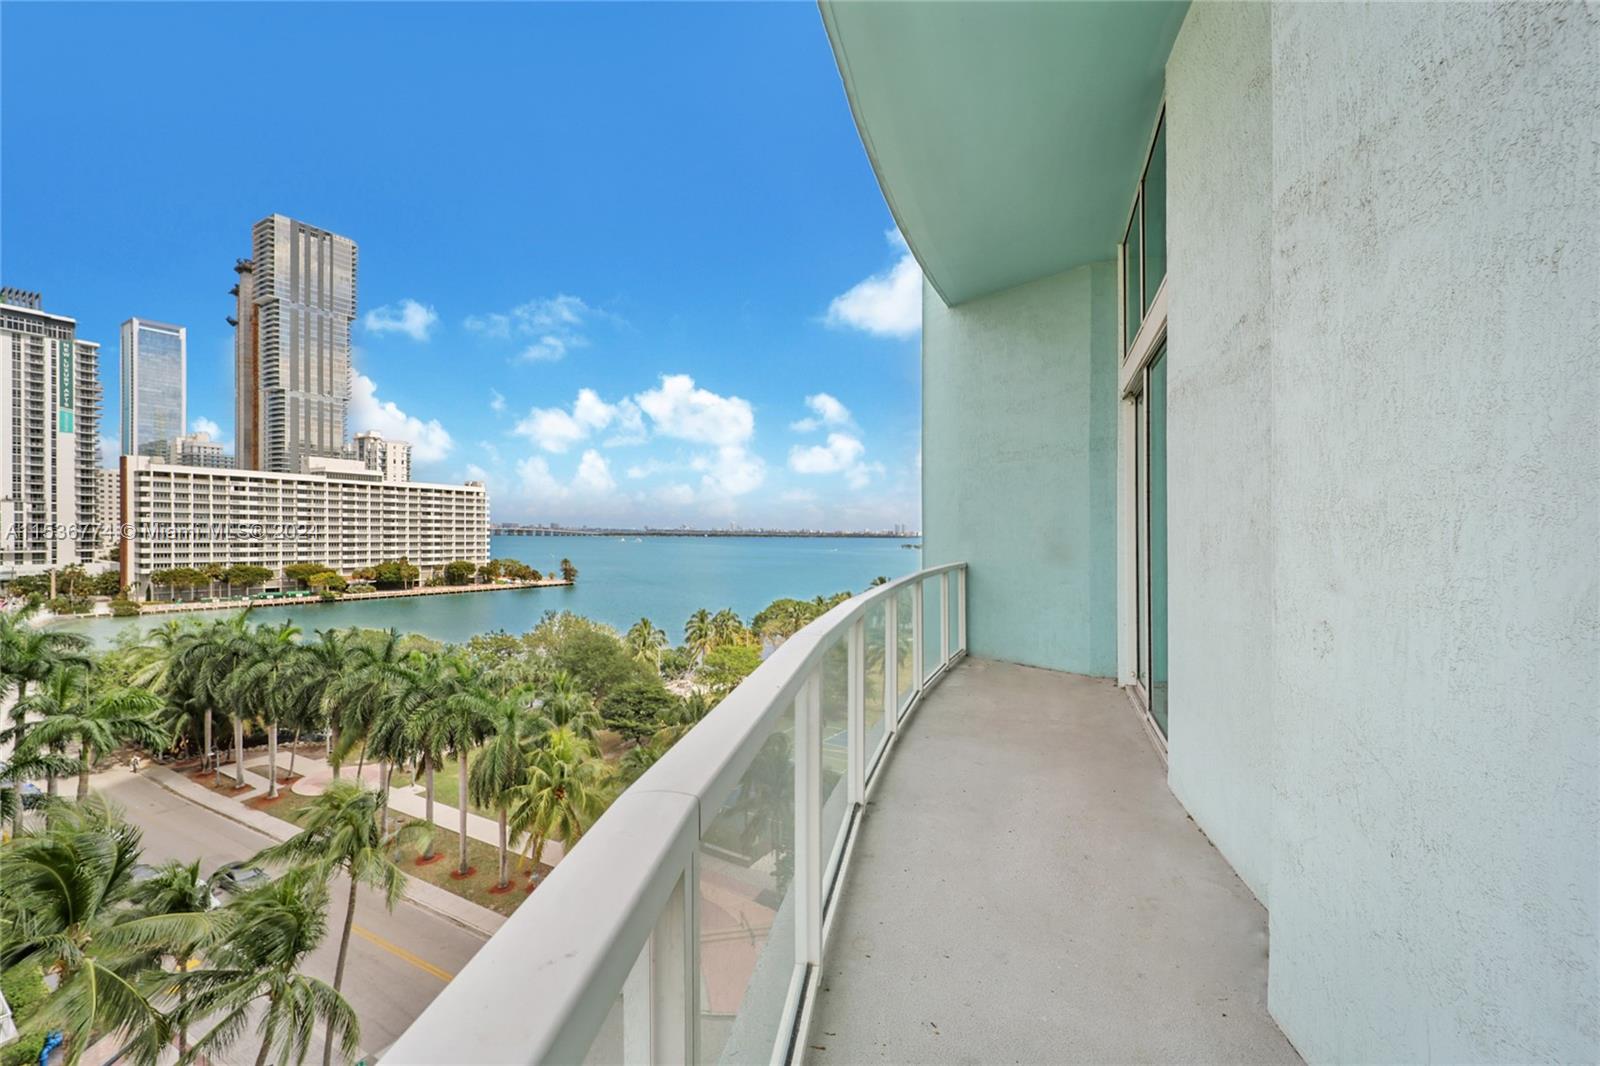 Awesome views and space in these 2 bedrooms with 14 ft celling height.  Located in one of the coolest buildings in Miami. Right next to the Venetian causeway and in front of a park you will enjoy two pools, gym, sauna and easy access to the entire city of Miami. A must see!